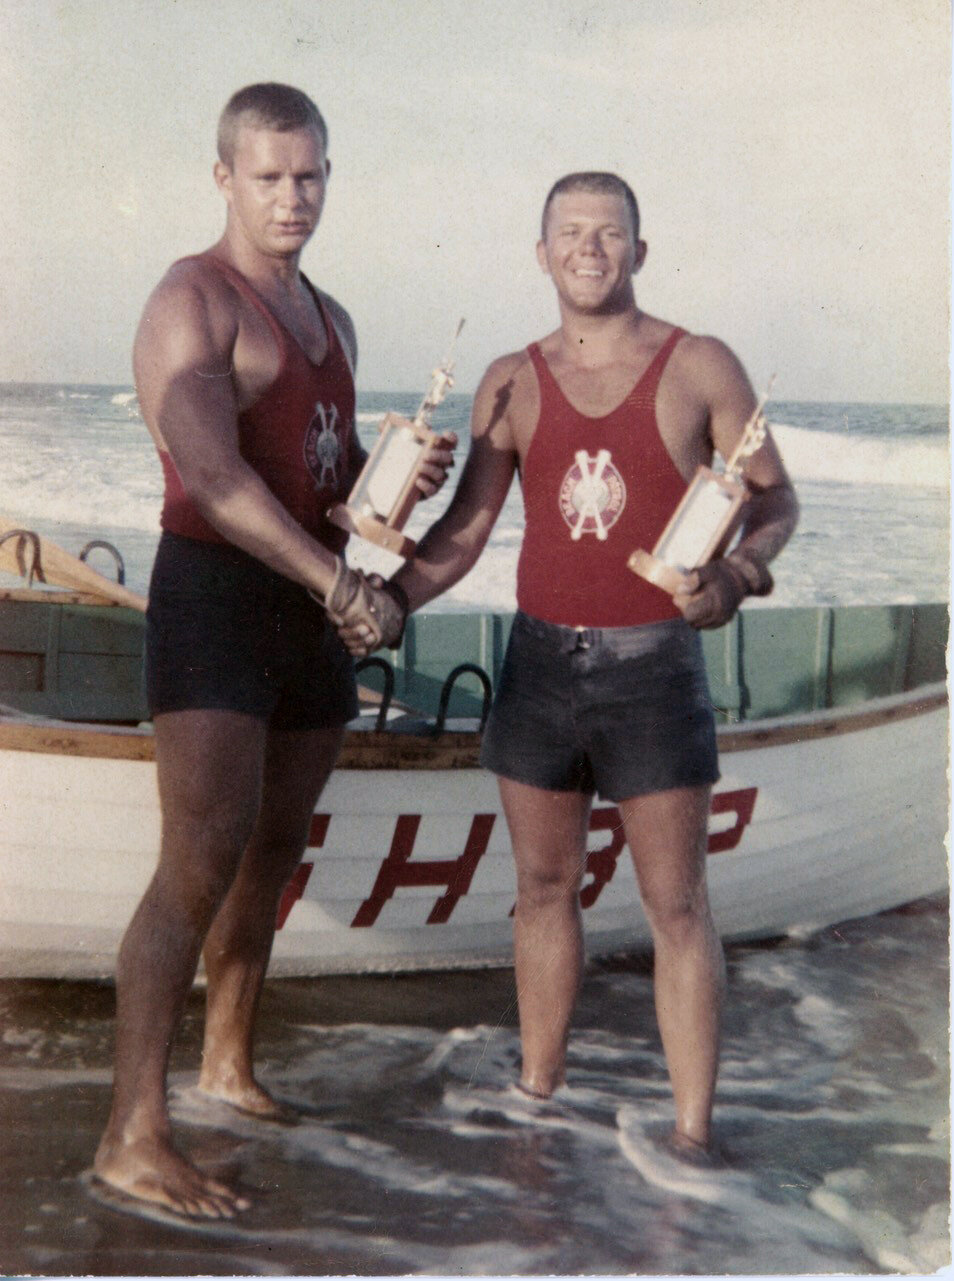 1961 SHBP doubles rowing winners Fred Miller and Al Behrendt